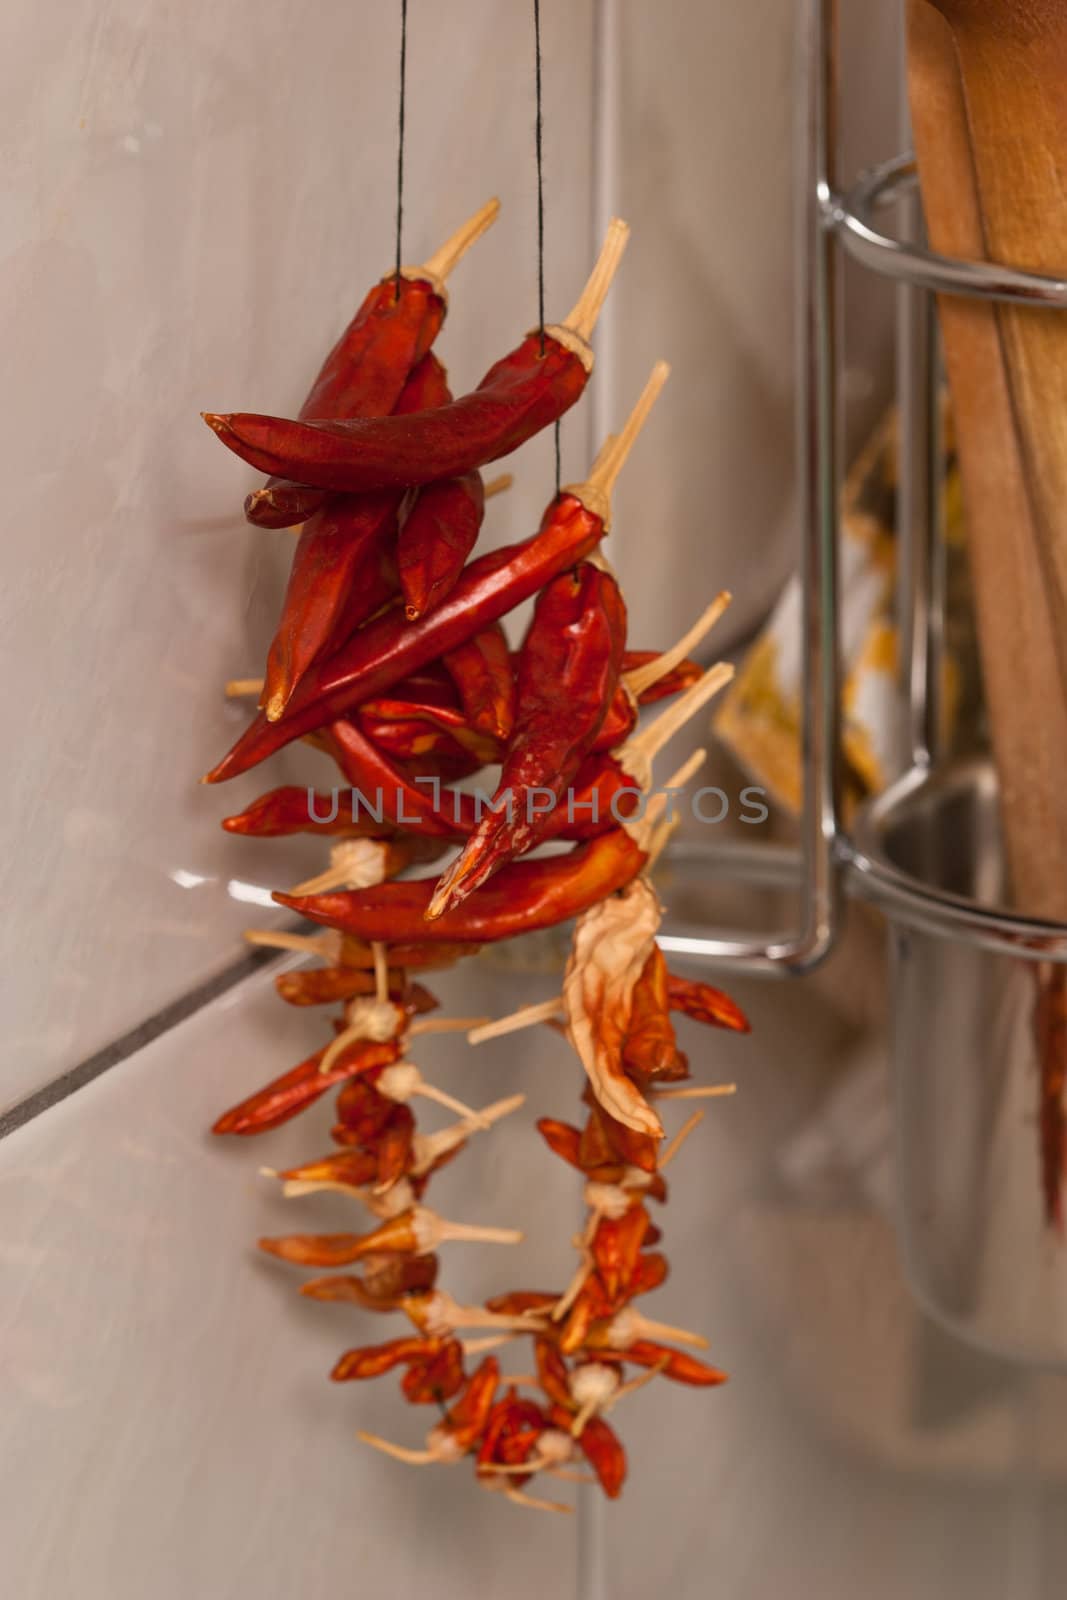 kitchen series: accessory and dry red pepper